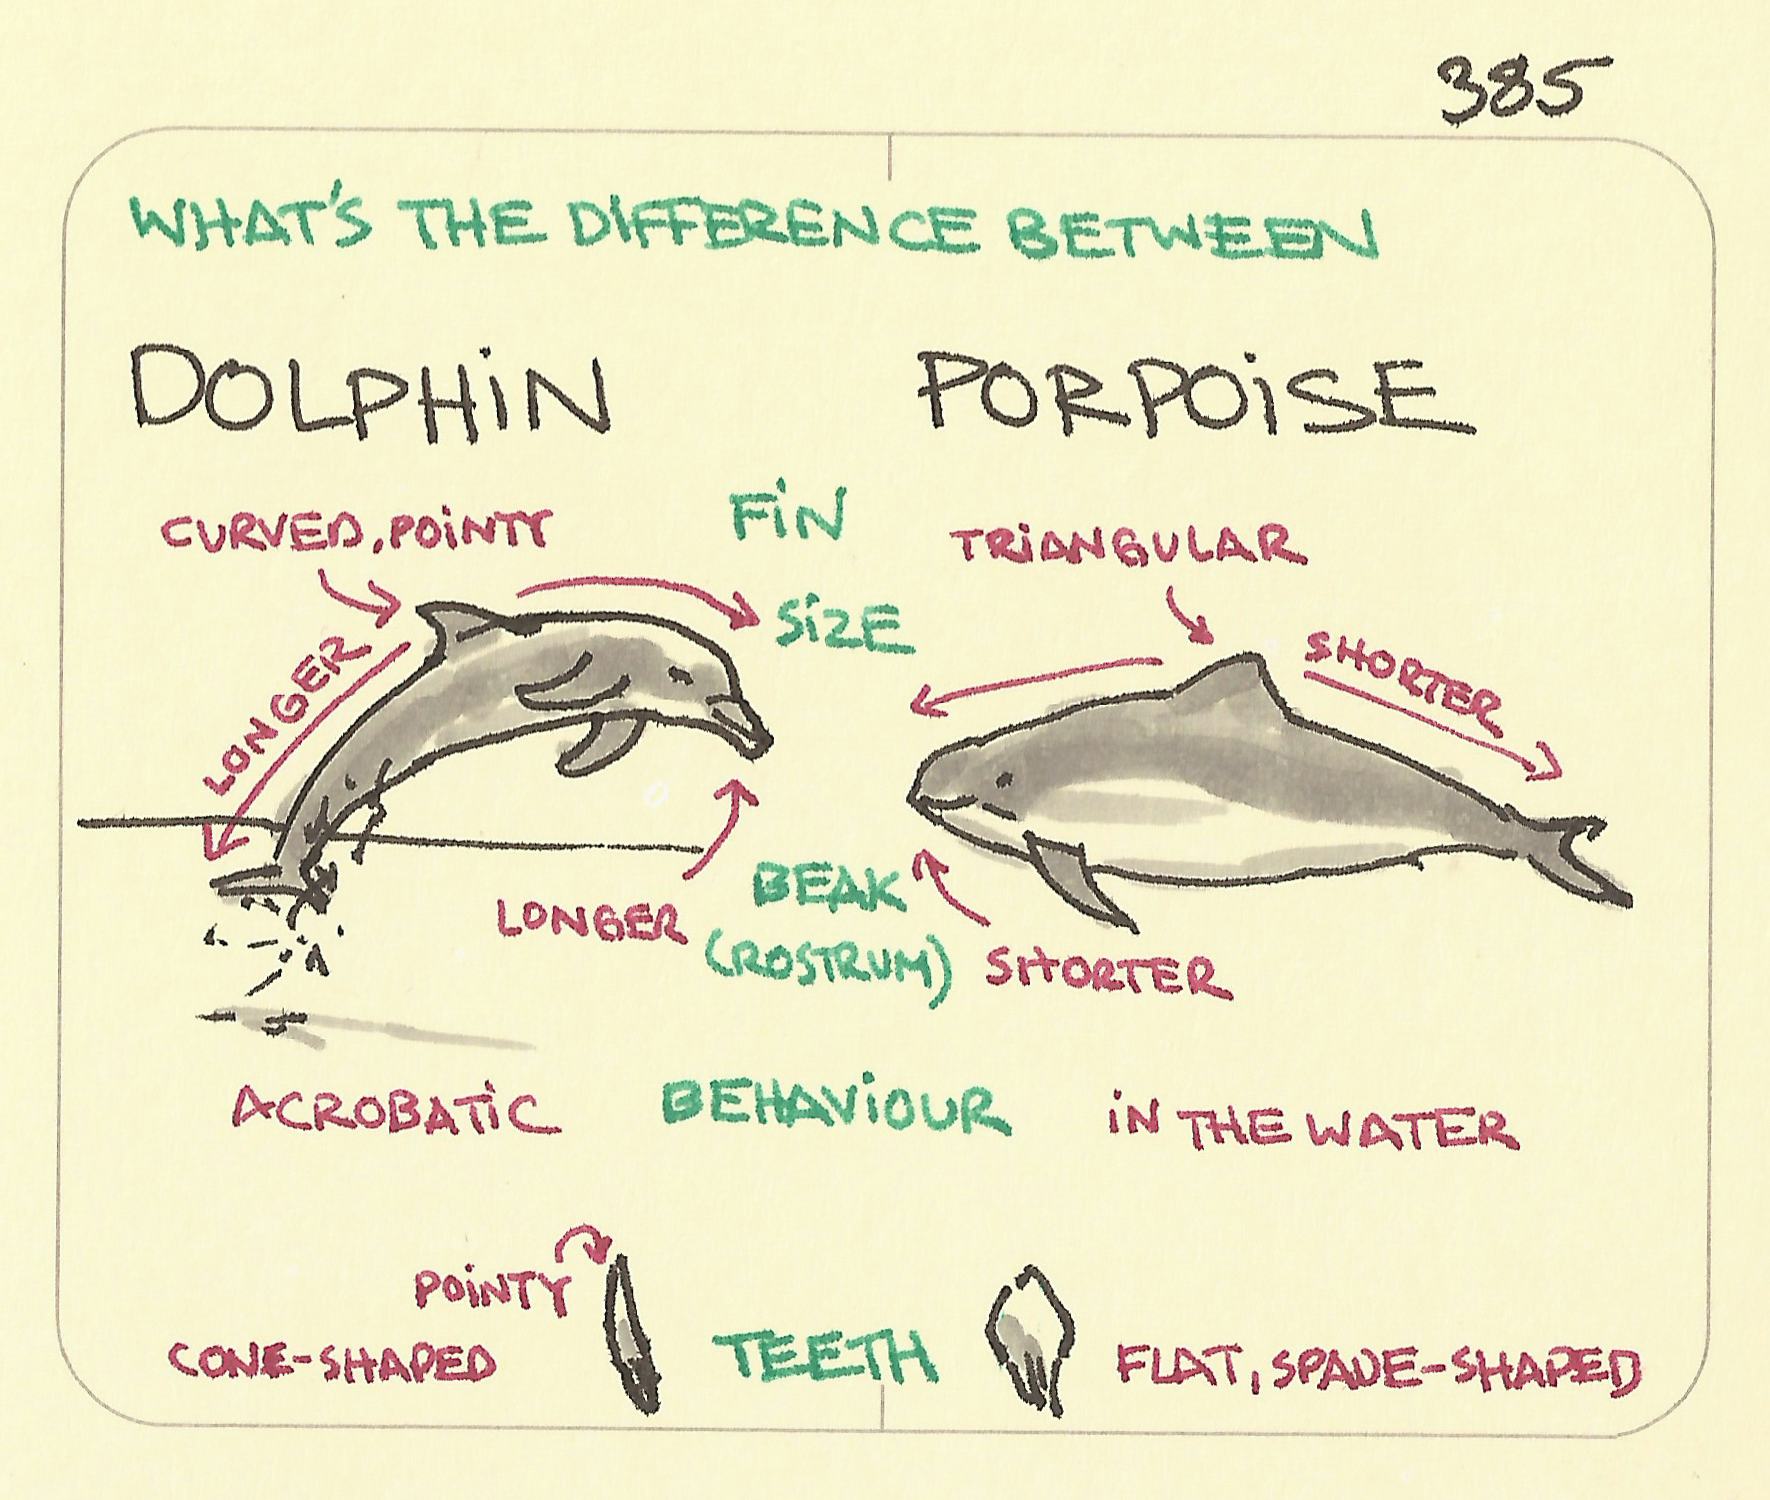 The difference between a dolphin and a porpoise illustrated